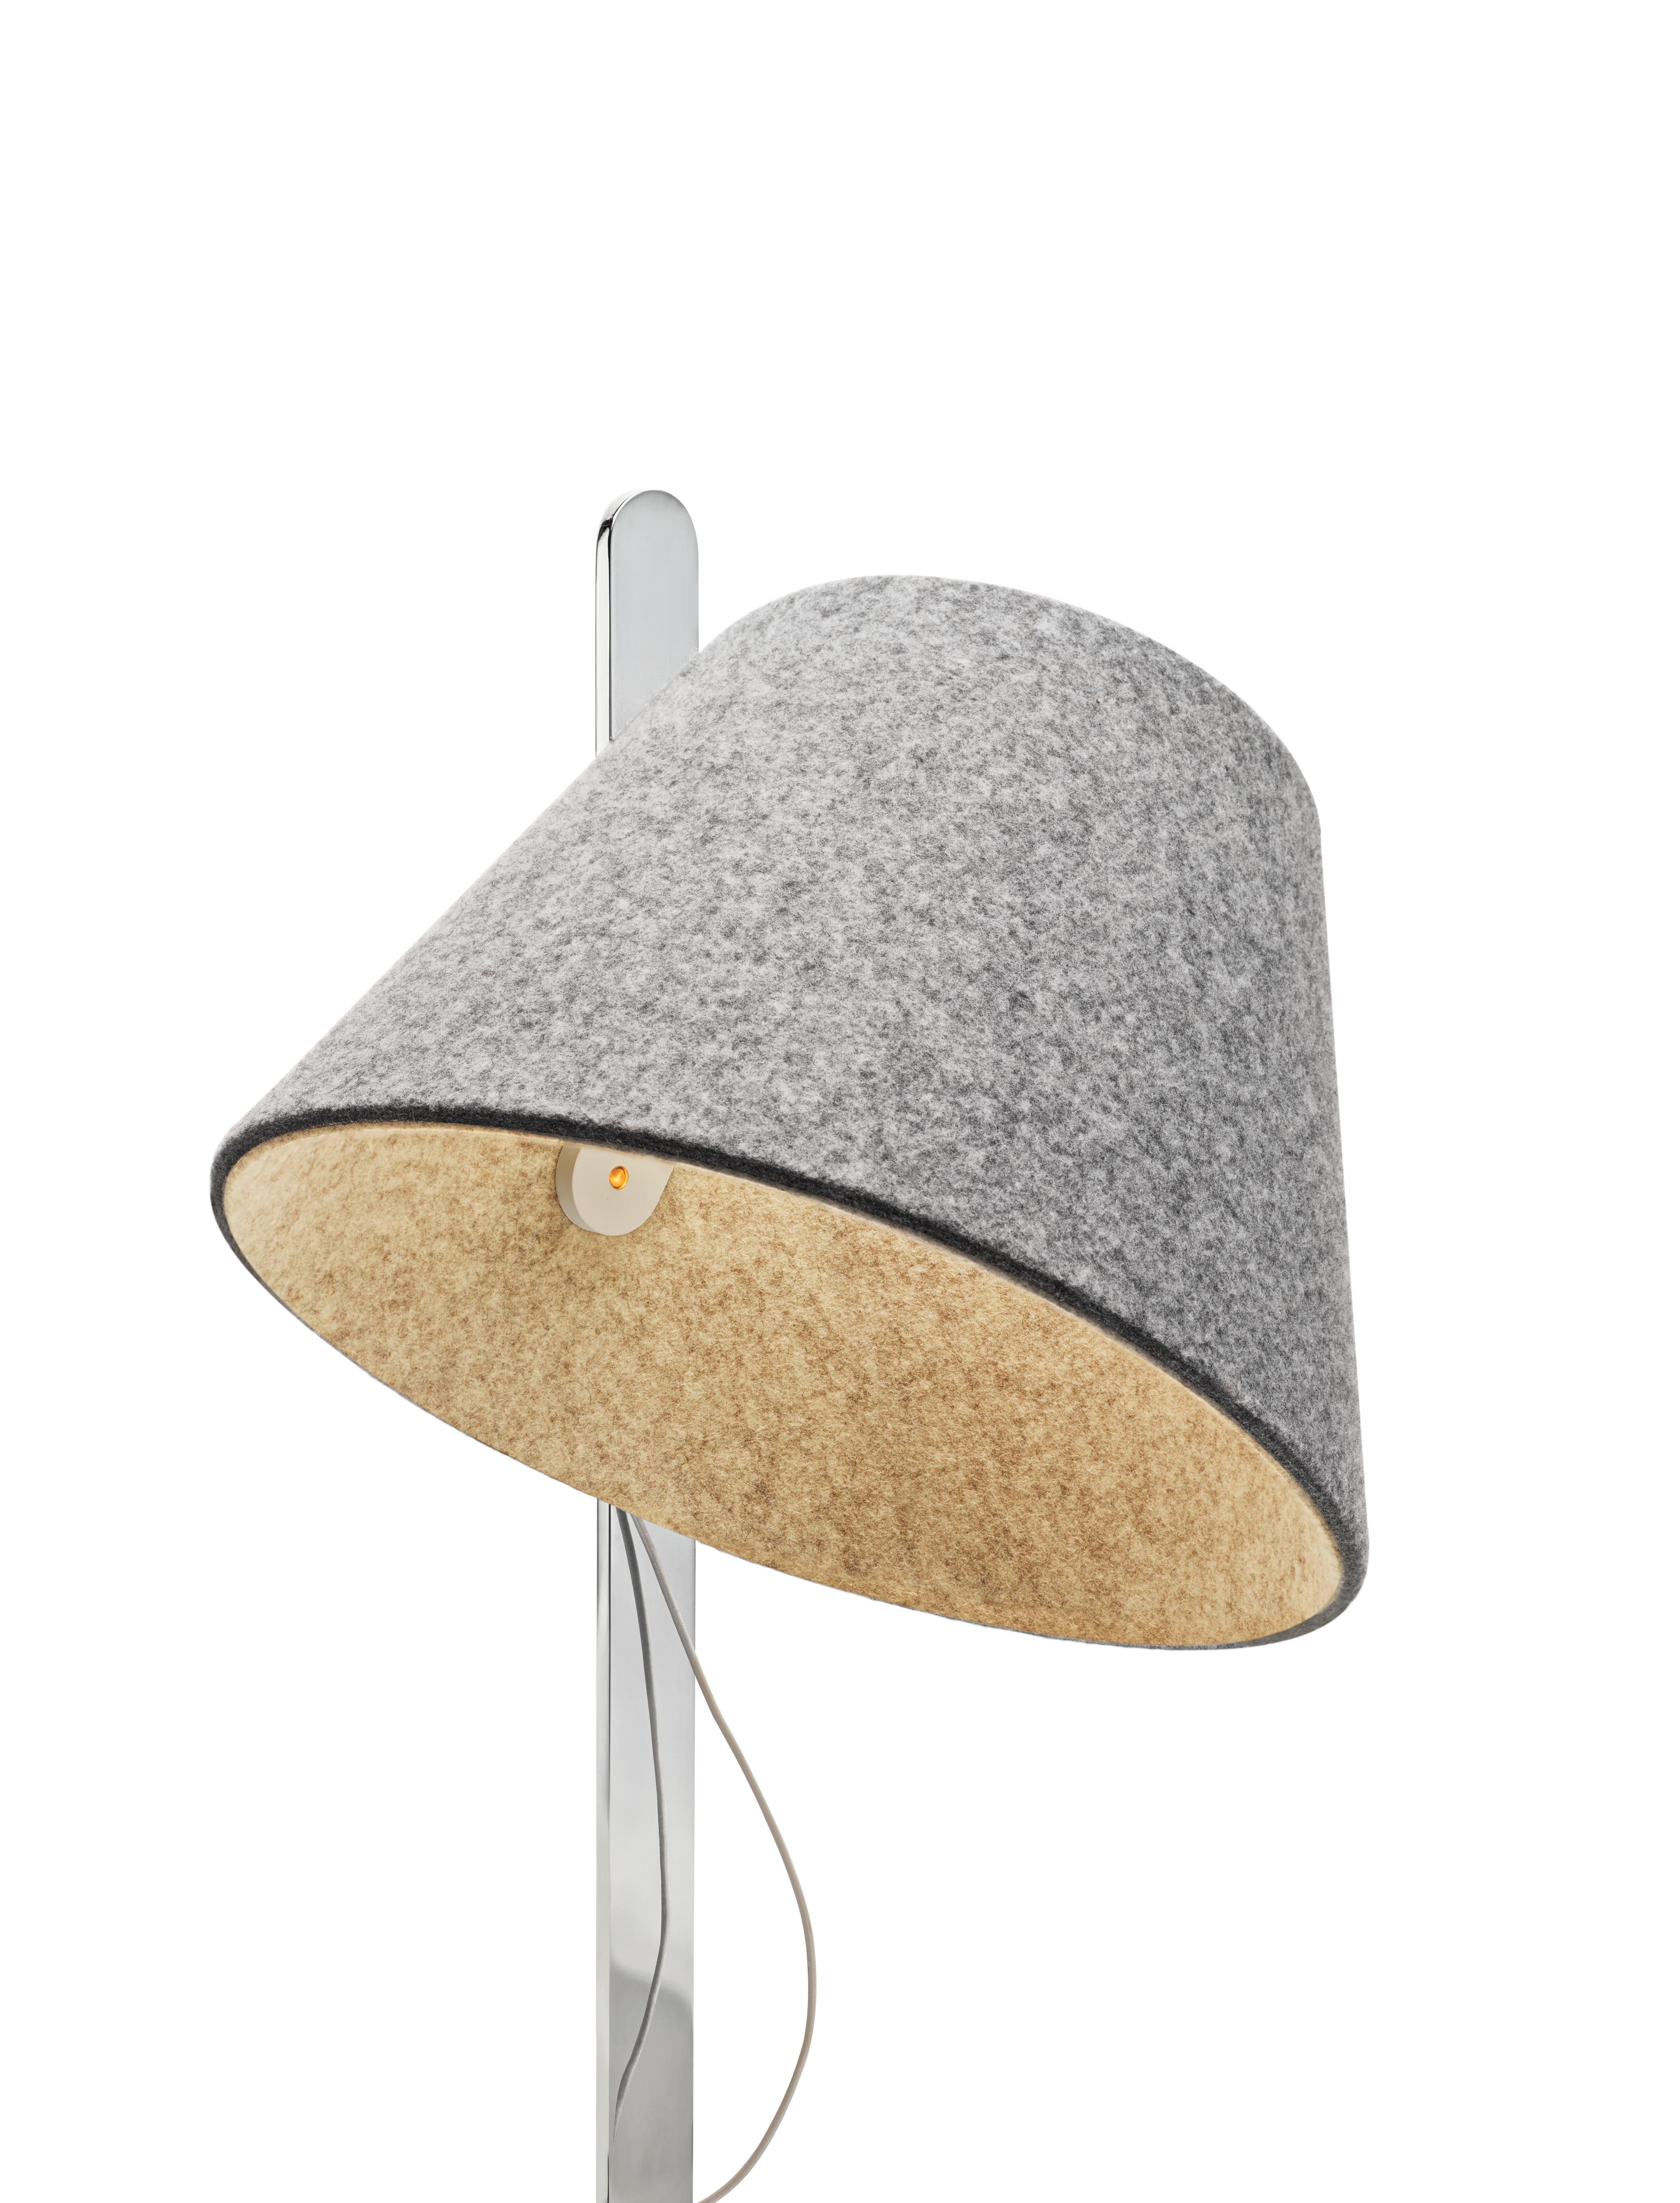 American Lana Small Table Lamp in Stone & Grey with White Base by Pablo Designs